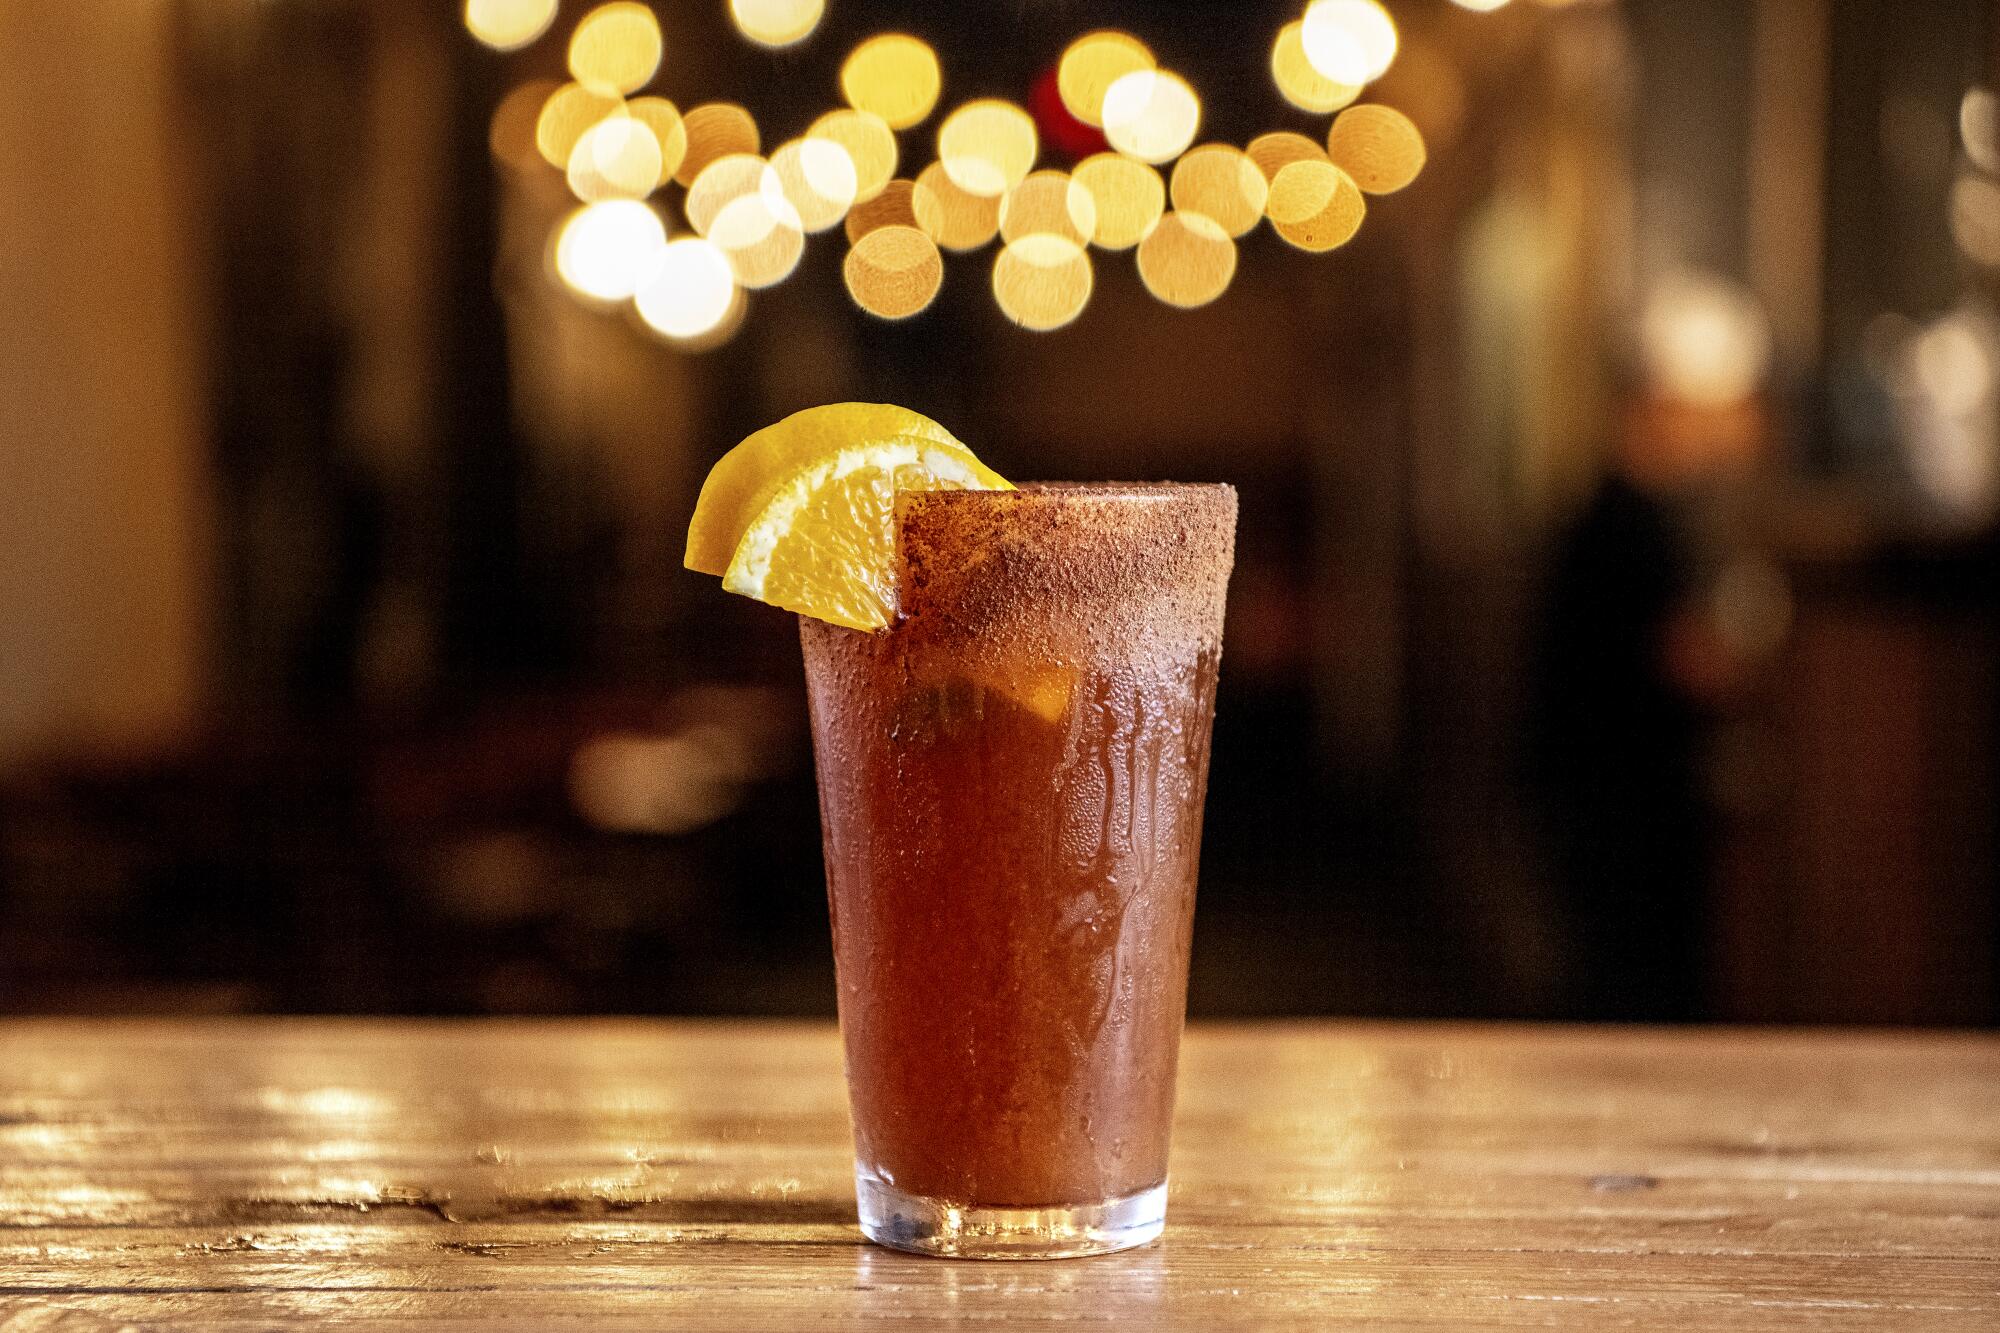 The drink of summer: How micheladas cast a spell on L.A. - Los